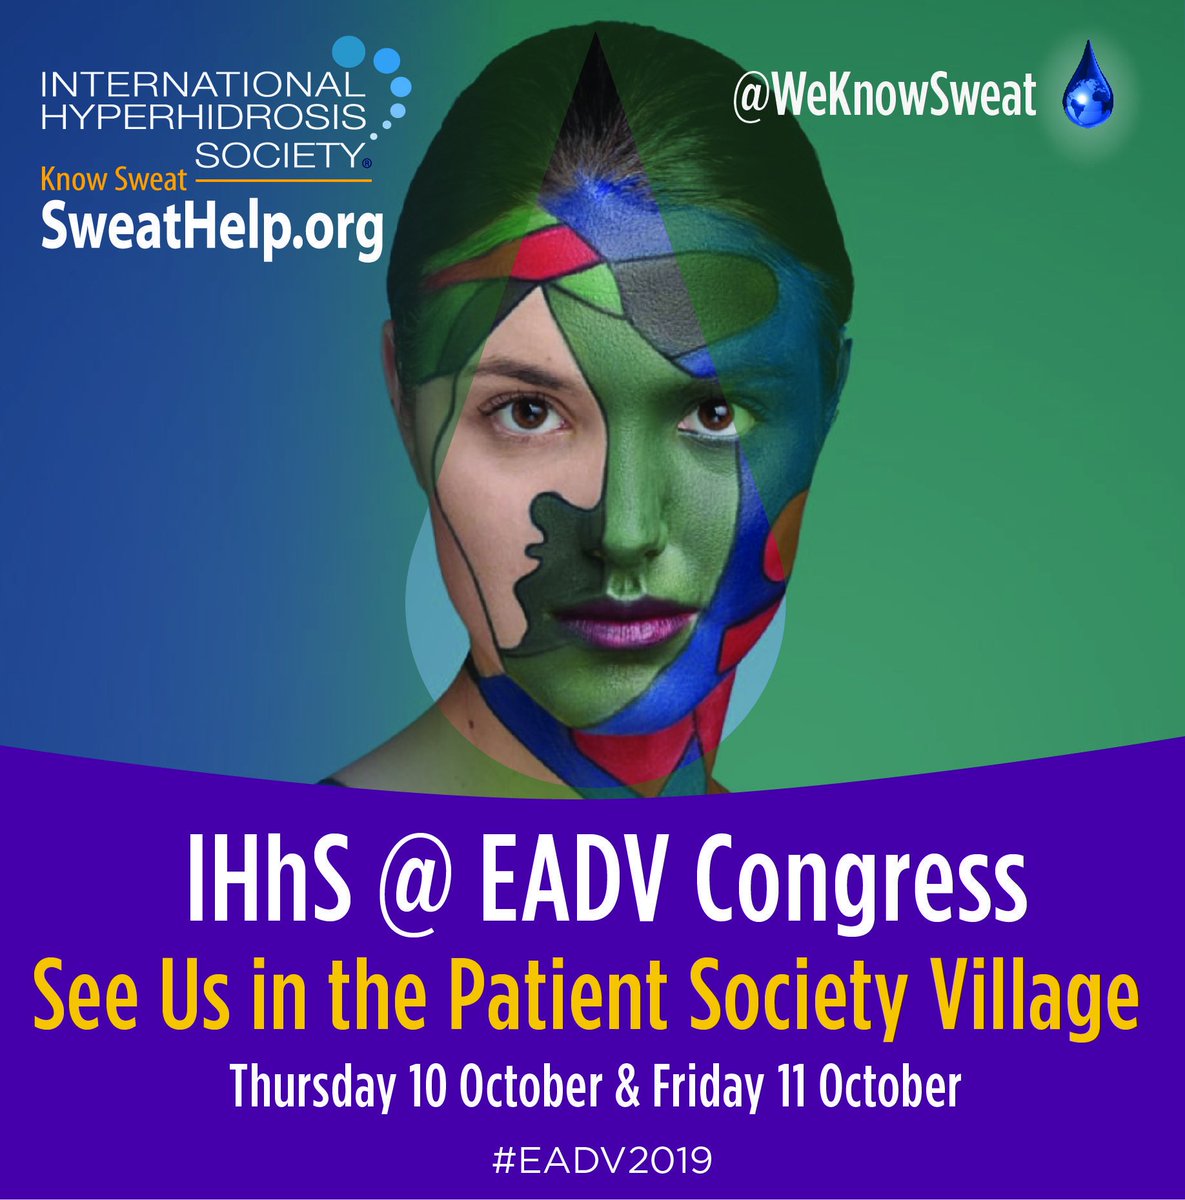 Visit @EADV #PatientSocietyVillage Oct. 10-11 @EADV Hall 09 to #discover #PatientVoice insights. The International #Hyperhidrosis Society is in great company: @IADPO @Europso_org @PsoriasisIFPA @EFA_Patients @PsoriasisEnRed @GA2P2 @ISFcharity #EADV2019 buff.ly/2pDk8hP